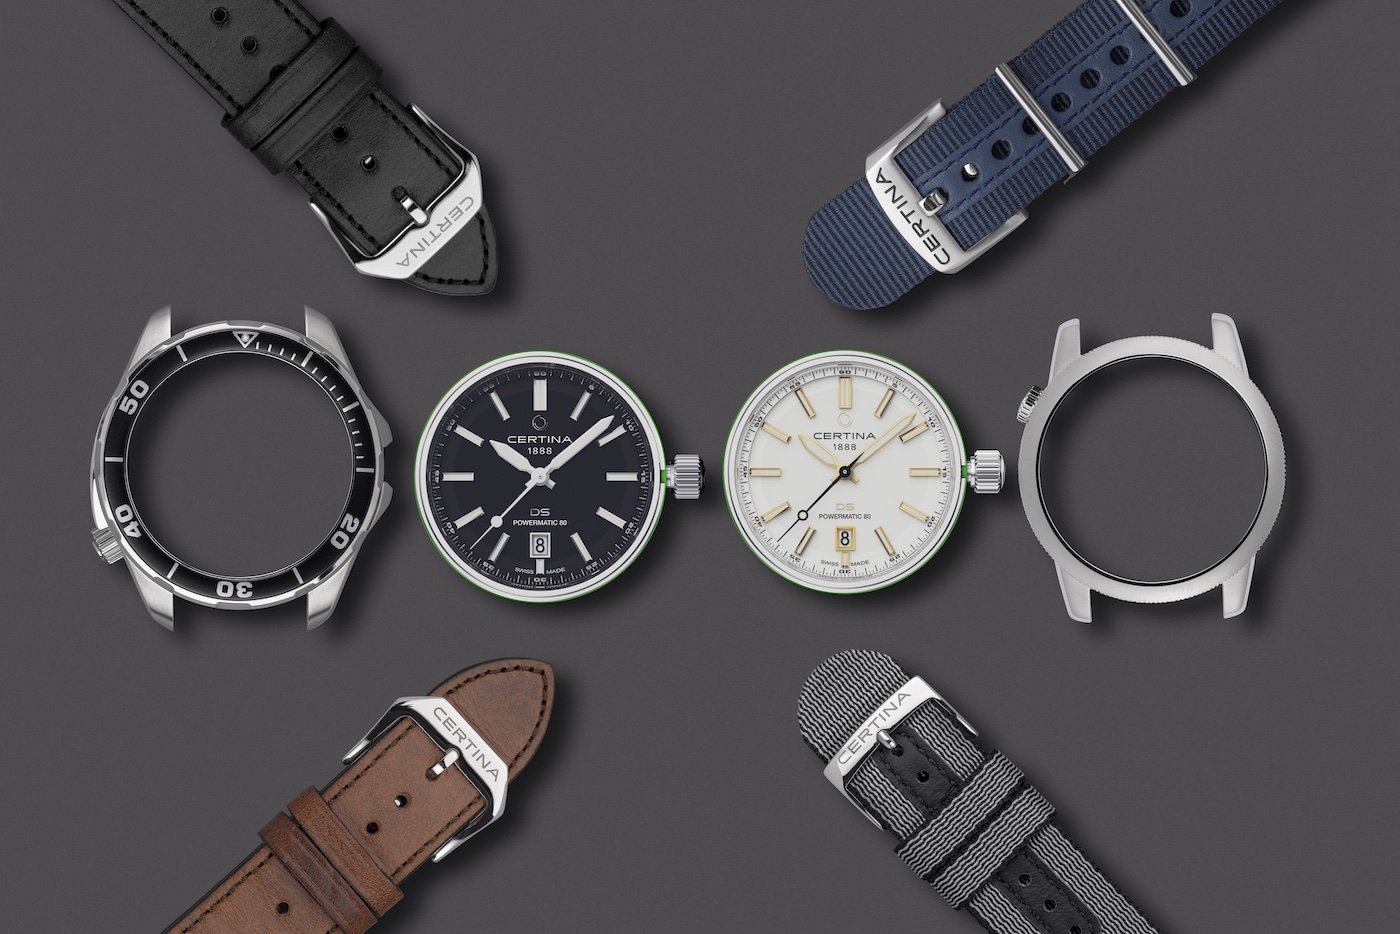 Certina's multiple-choice watches